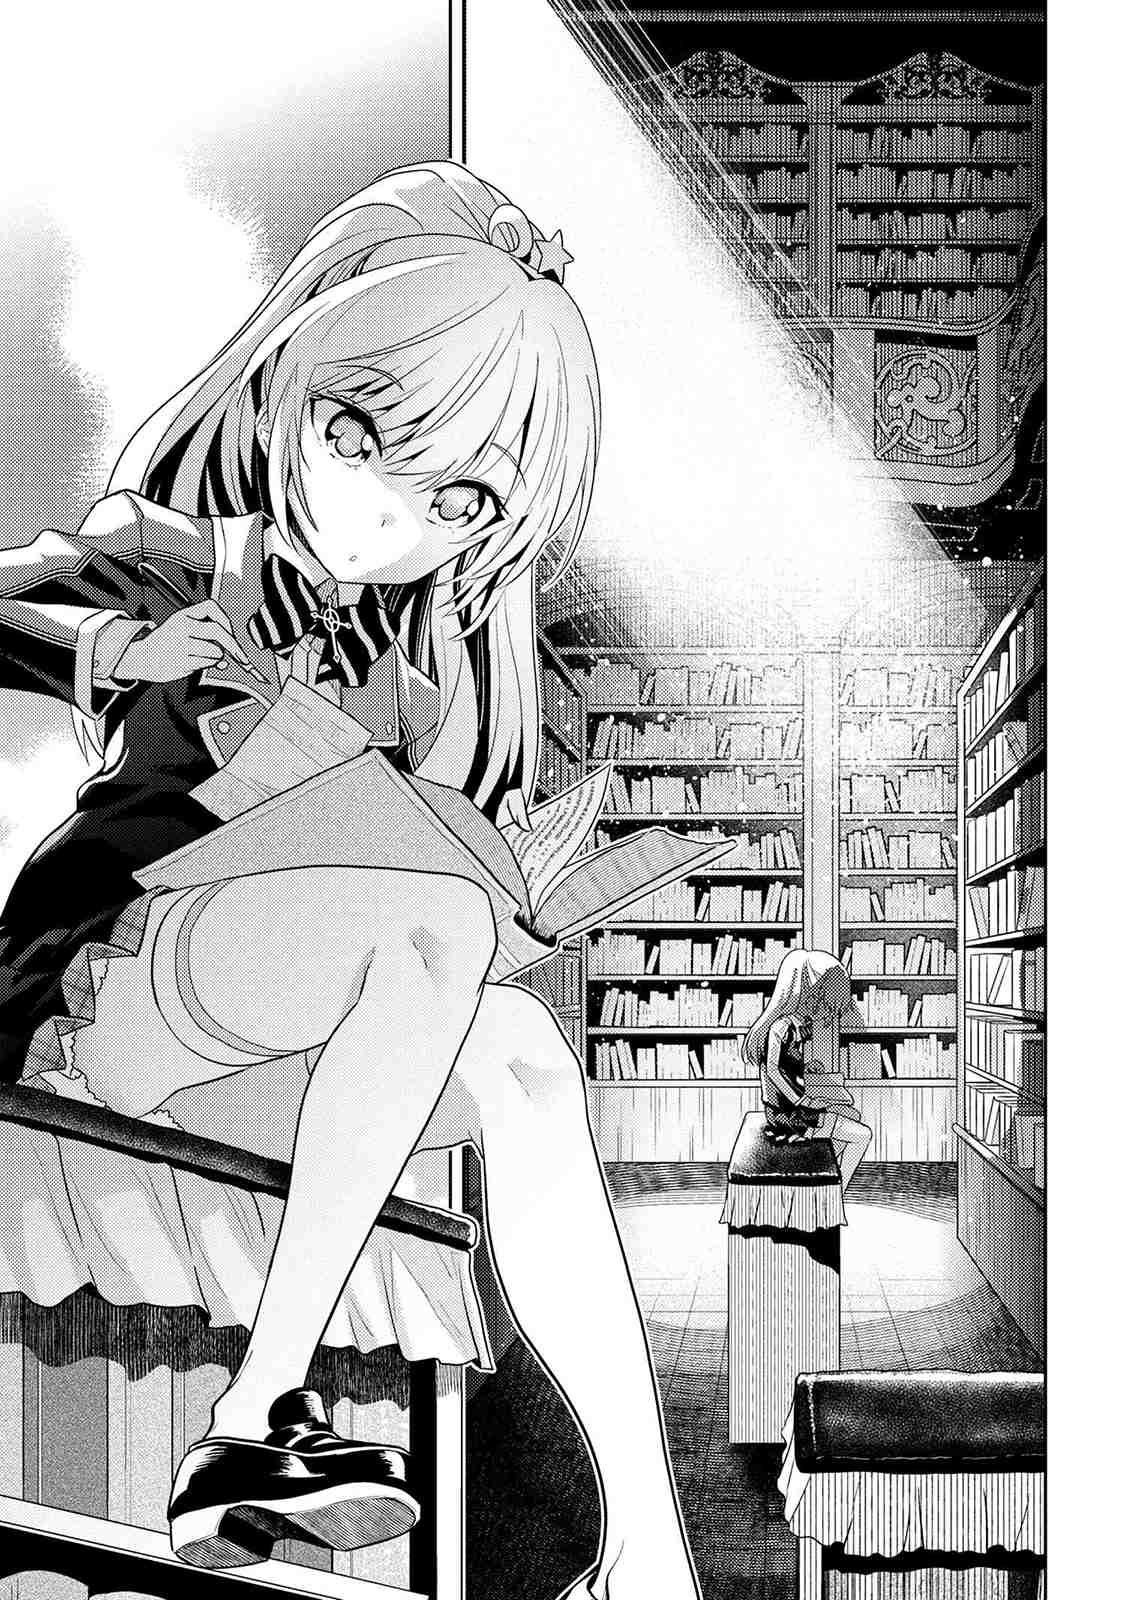 Classroom of the Elite, Chapter 15 - Classroom of the Elite Manga Online